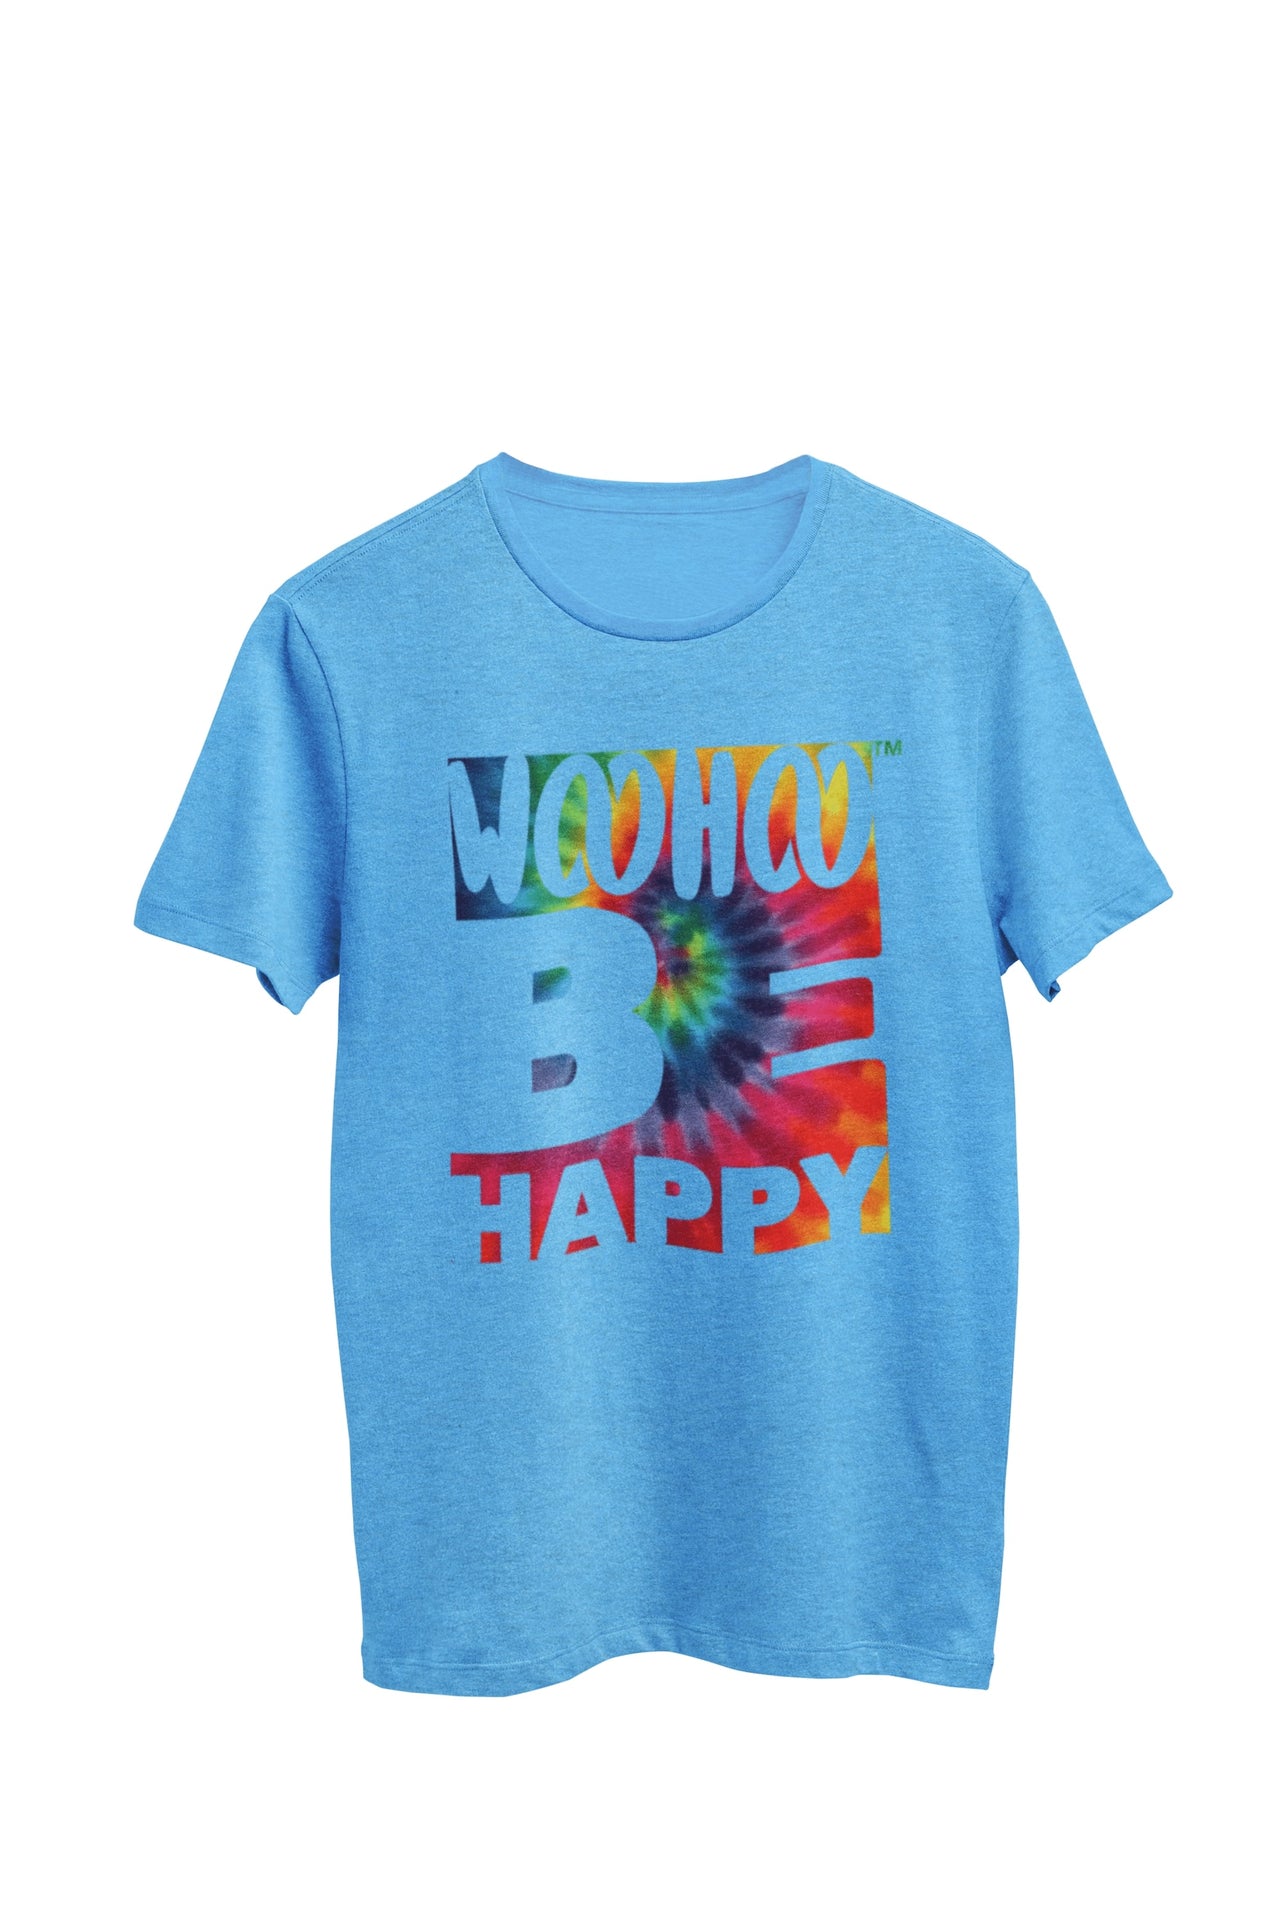 Light blue heather unisex t-shirt featuring the text 'Be Happy' in a tie-dye font. Designed by WooHoo Apparel.